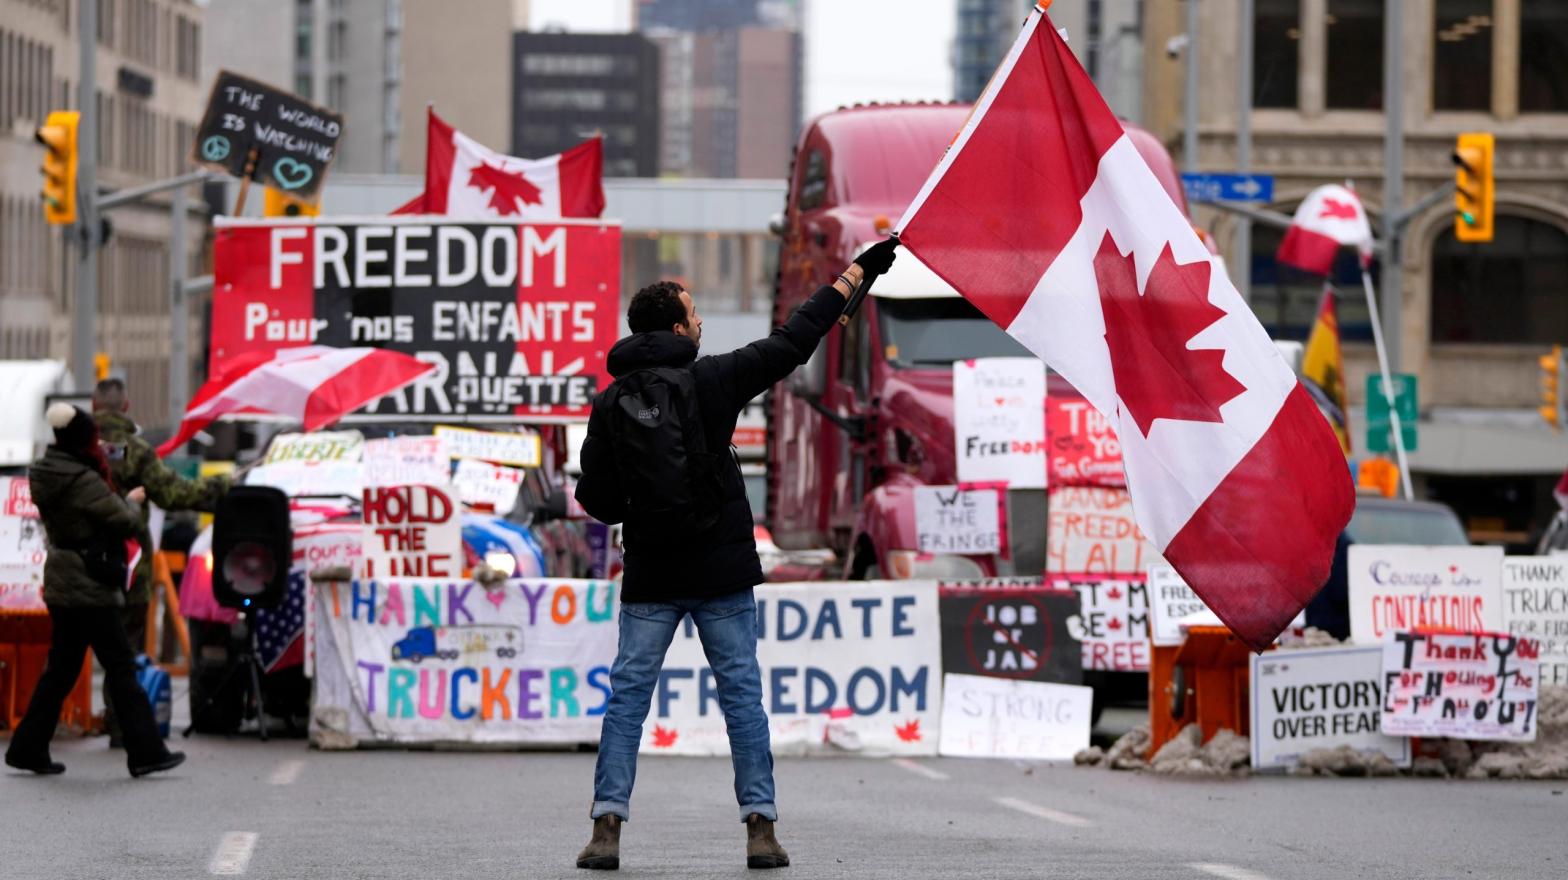 A protester waves a Canadian flag in front of parked vehicles on Rideau Street at a protest against COVID-19 measures that has grown into a broader anti-government protest, in Ottawa, Ontario, Friday, Feb. 11, 2022.  (Photo: Justin Tang/The Canadian Press via AP, AP)